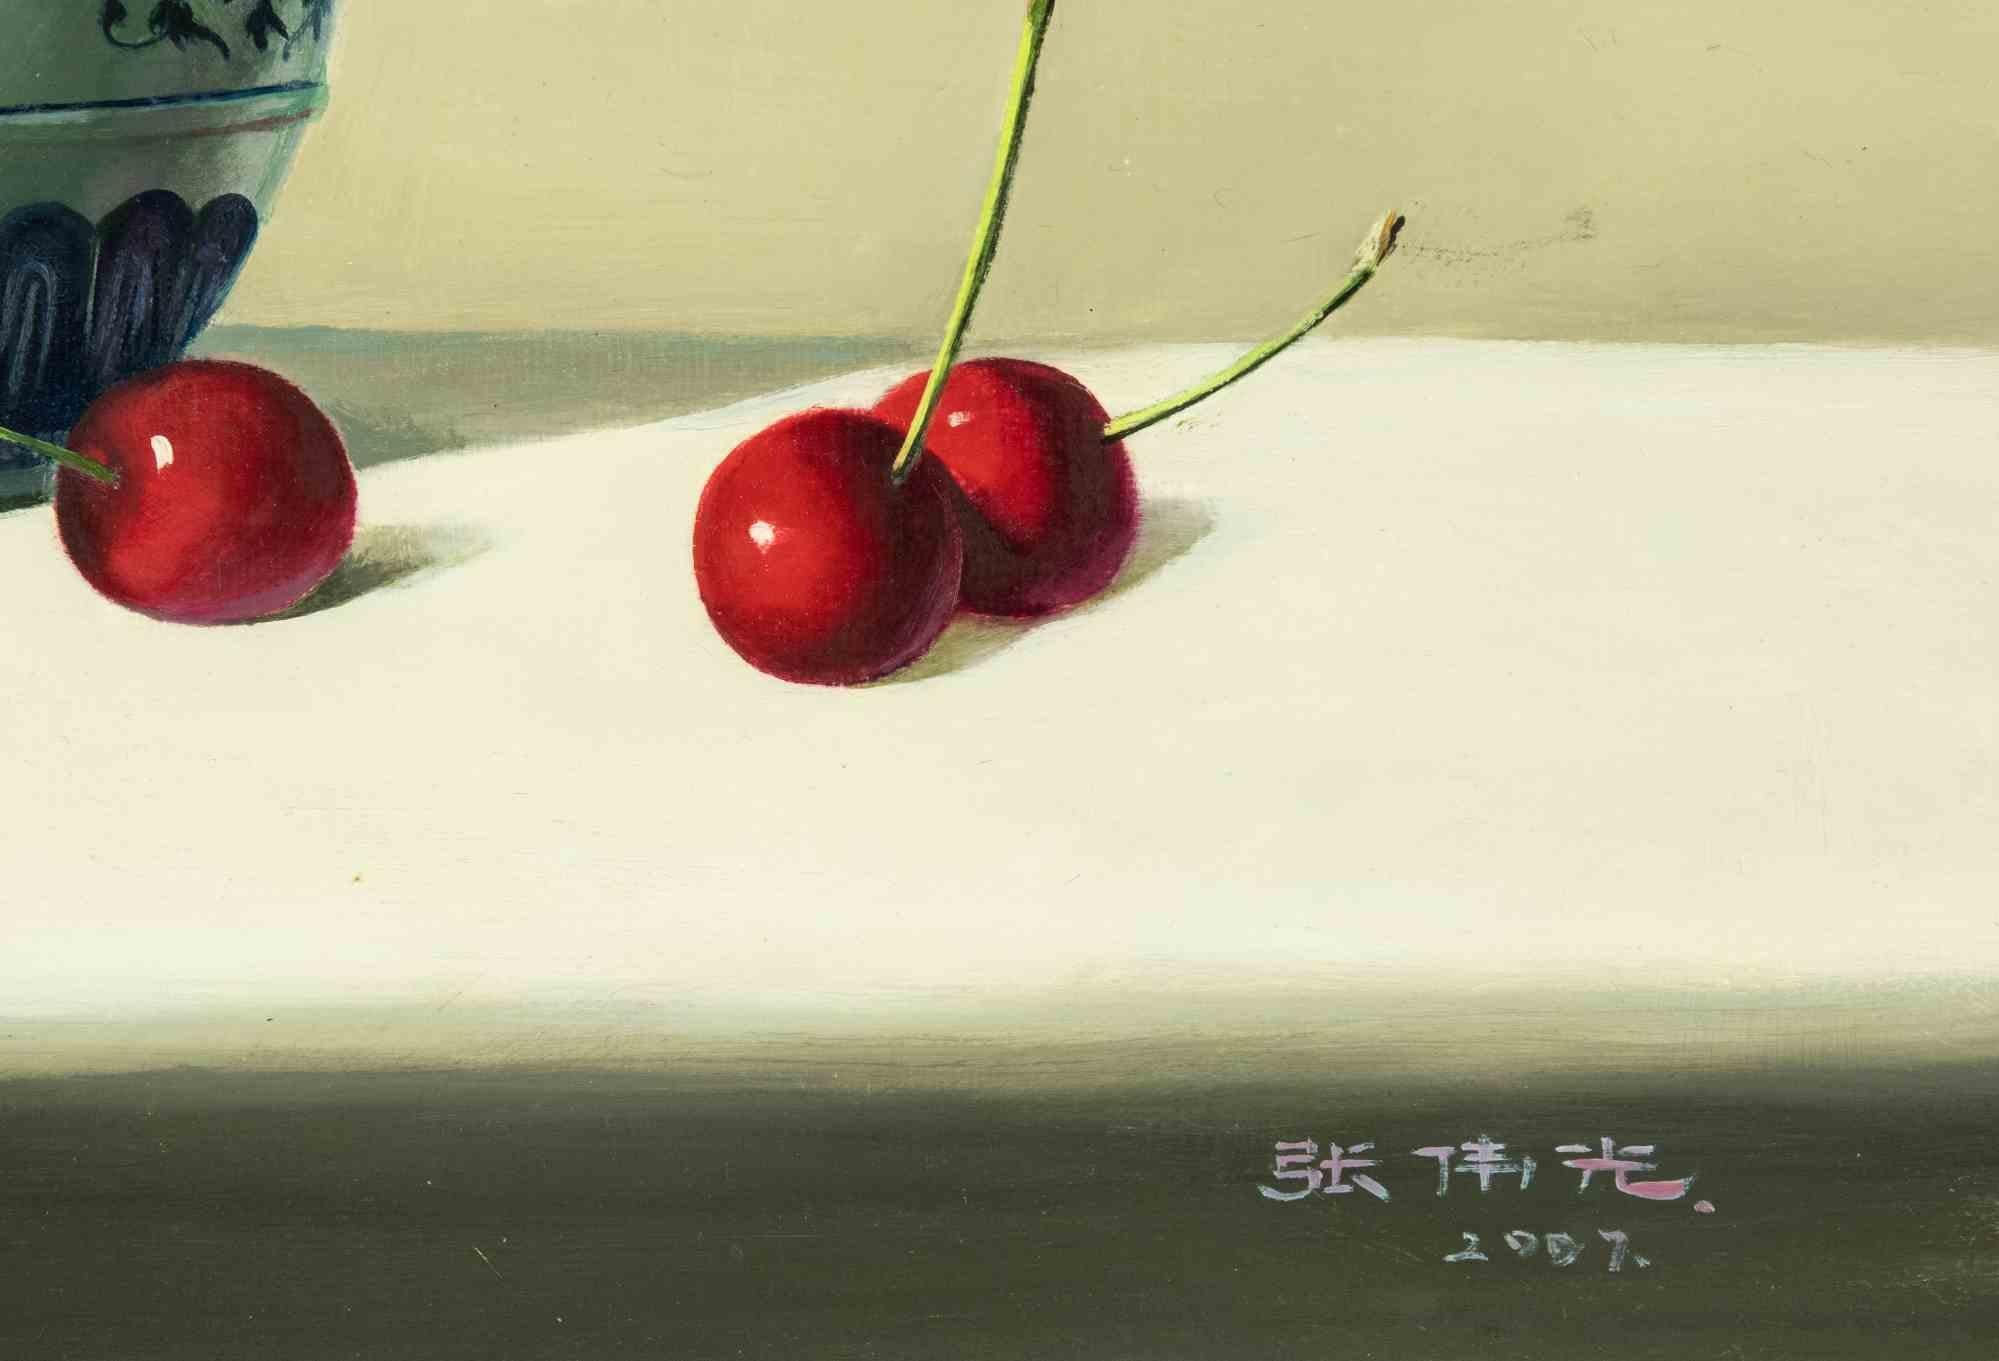 Cherries on the Table  is an oil painting realized  by Zhang Wei Guang (Mirror) in 2007.

Includes frame.

Hand signed and dated on the lower margin

Very Good conditions.

Zhang Wei Guang , also called ‘mirror' was born in Helong Jang, China in